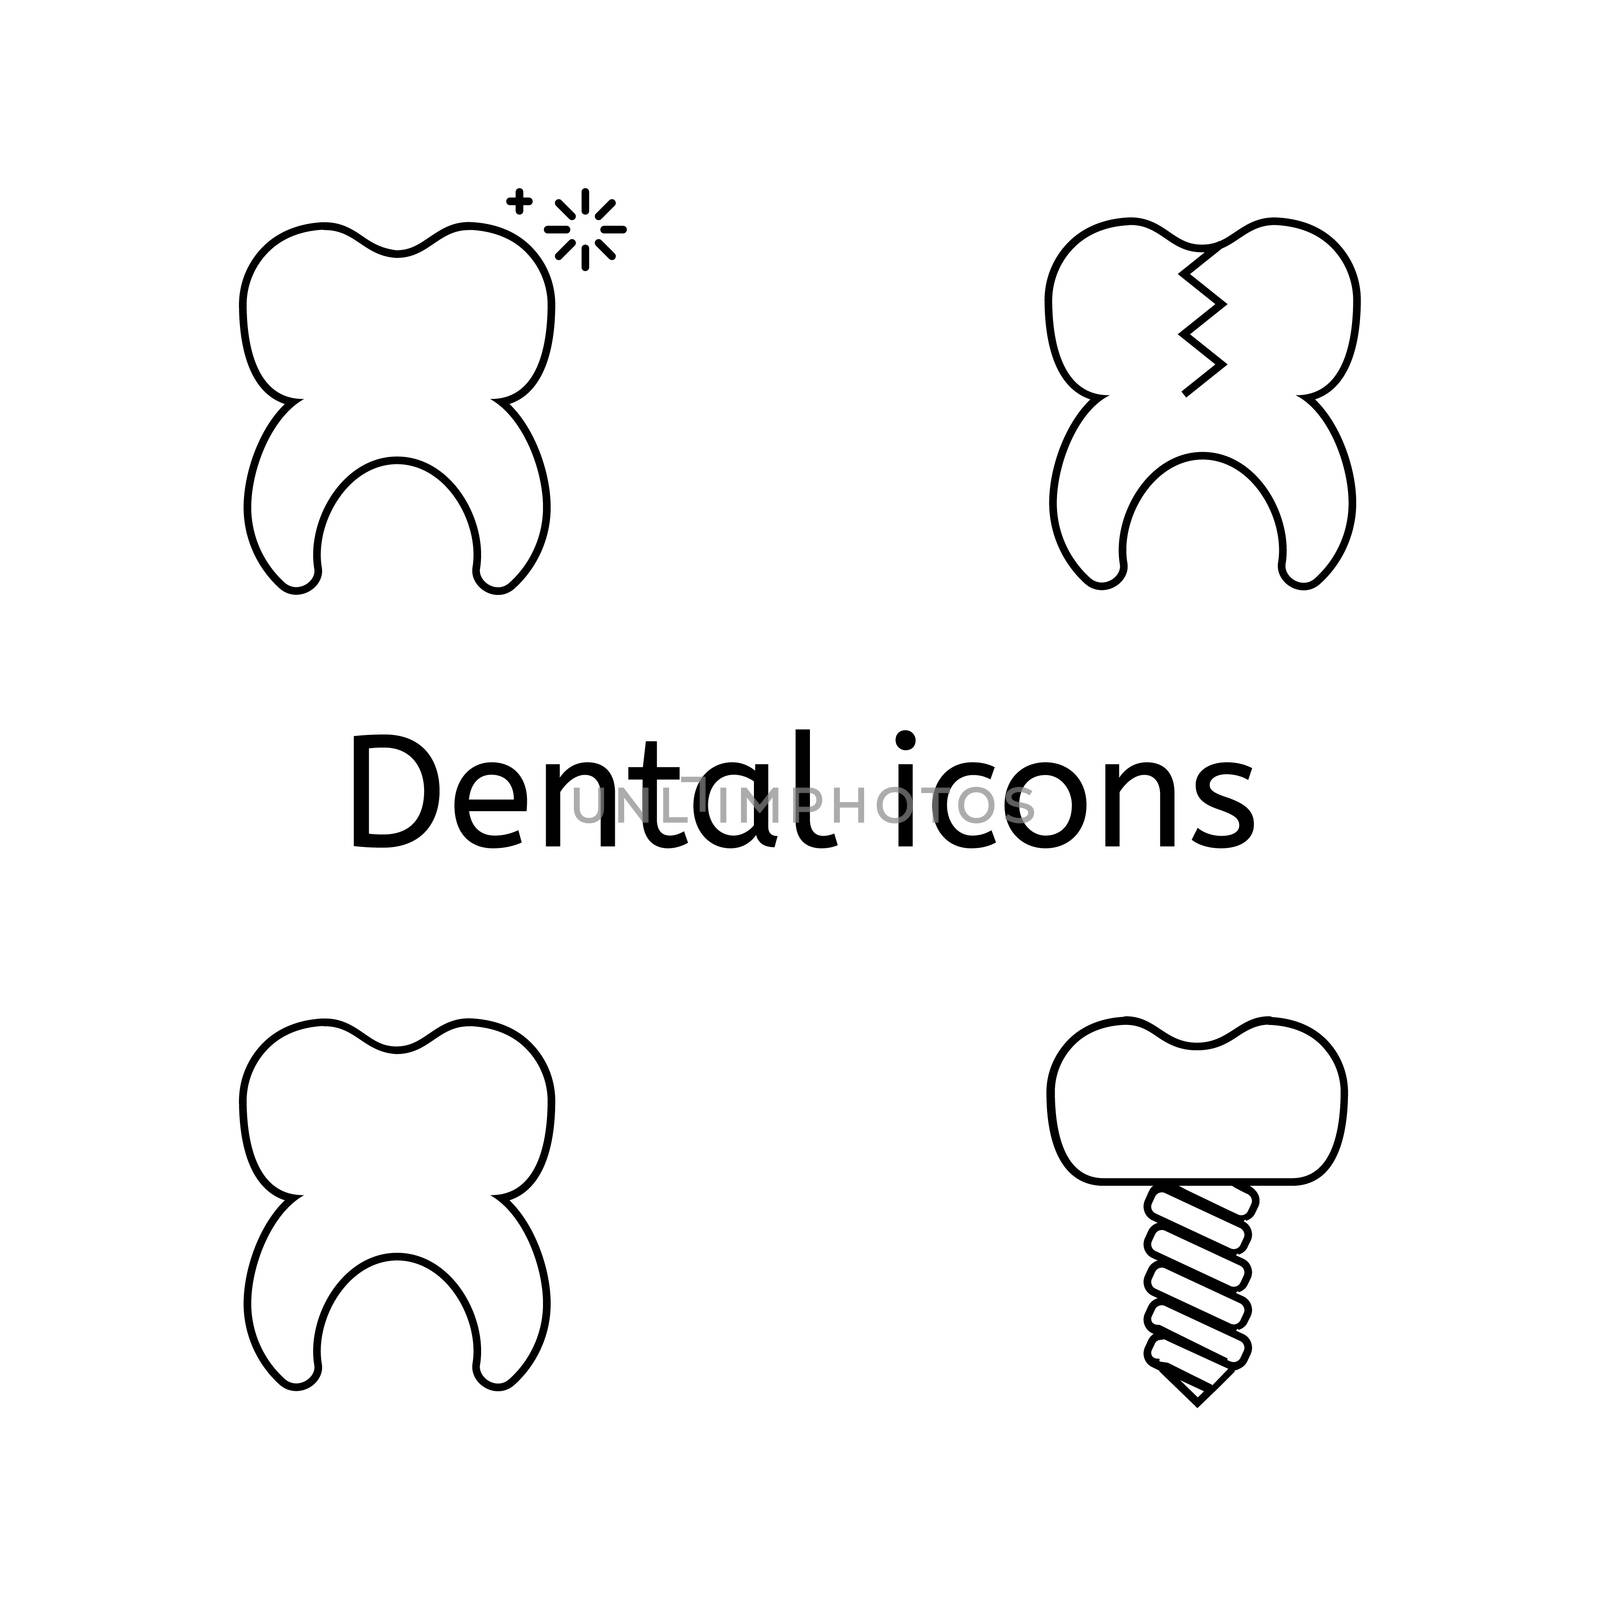 Tooth icons set. Simple dentistry pictograms on a white background.